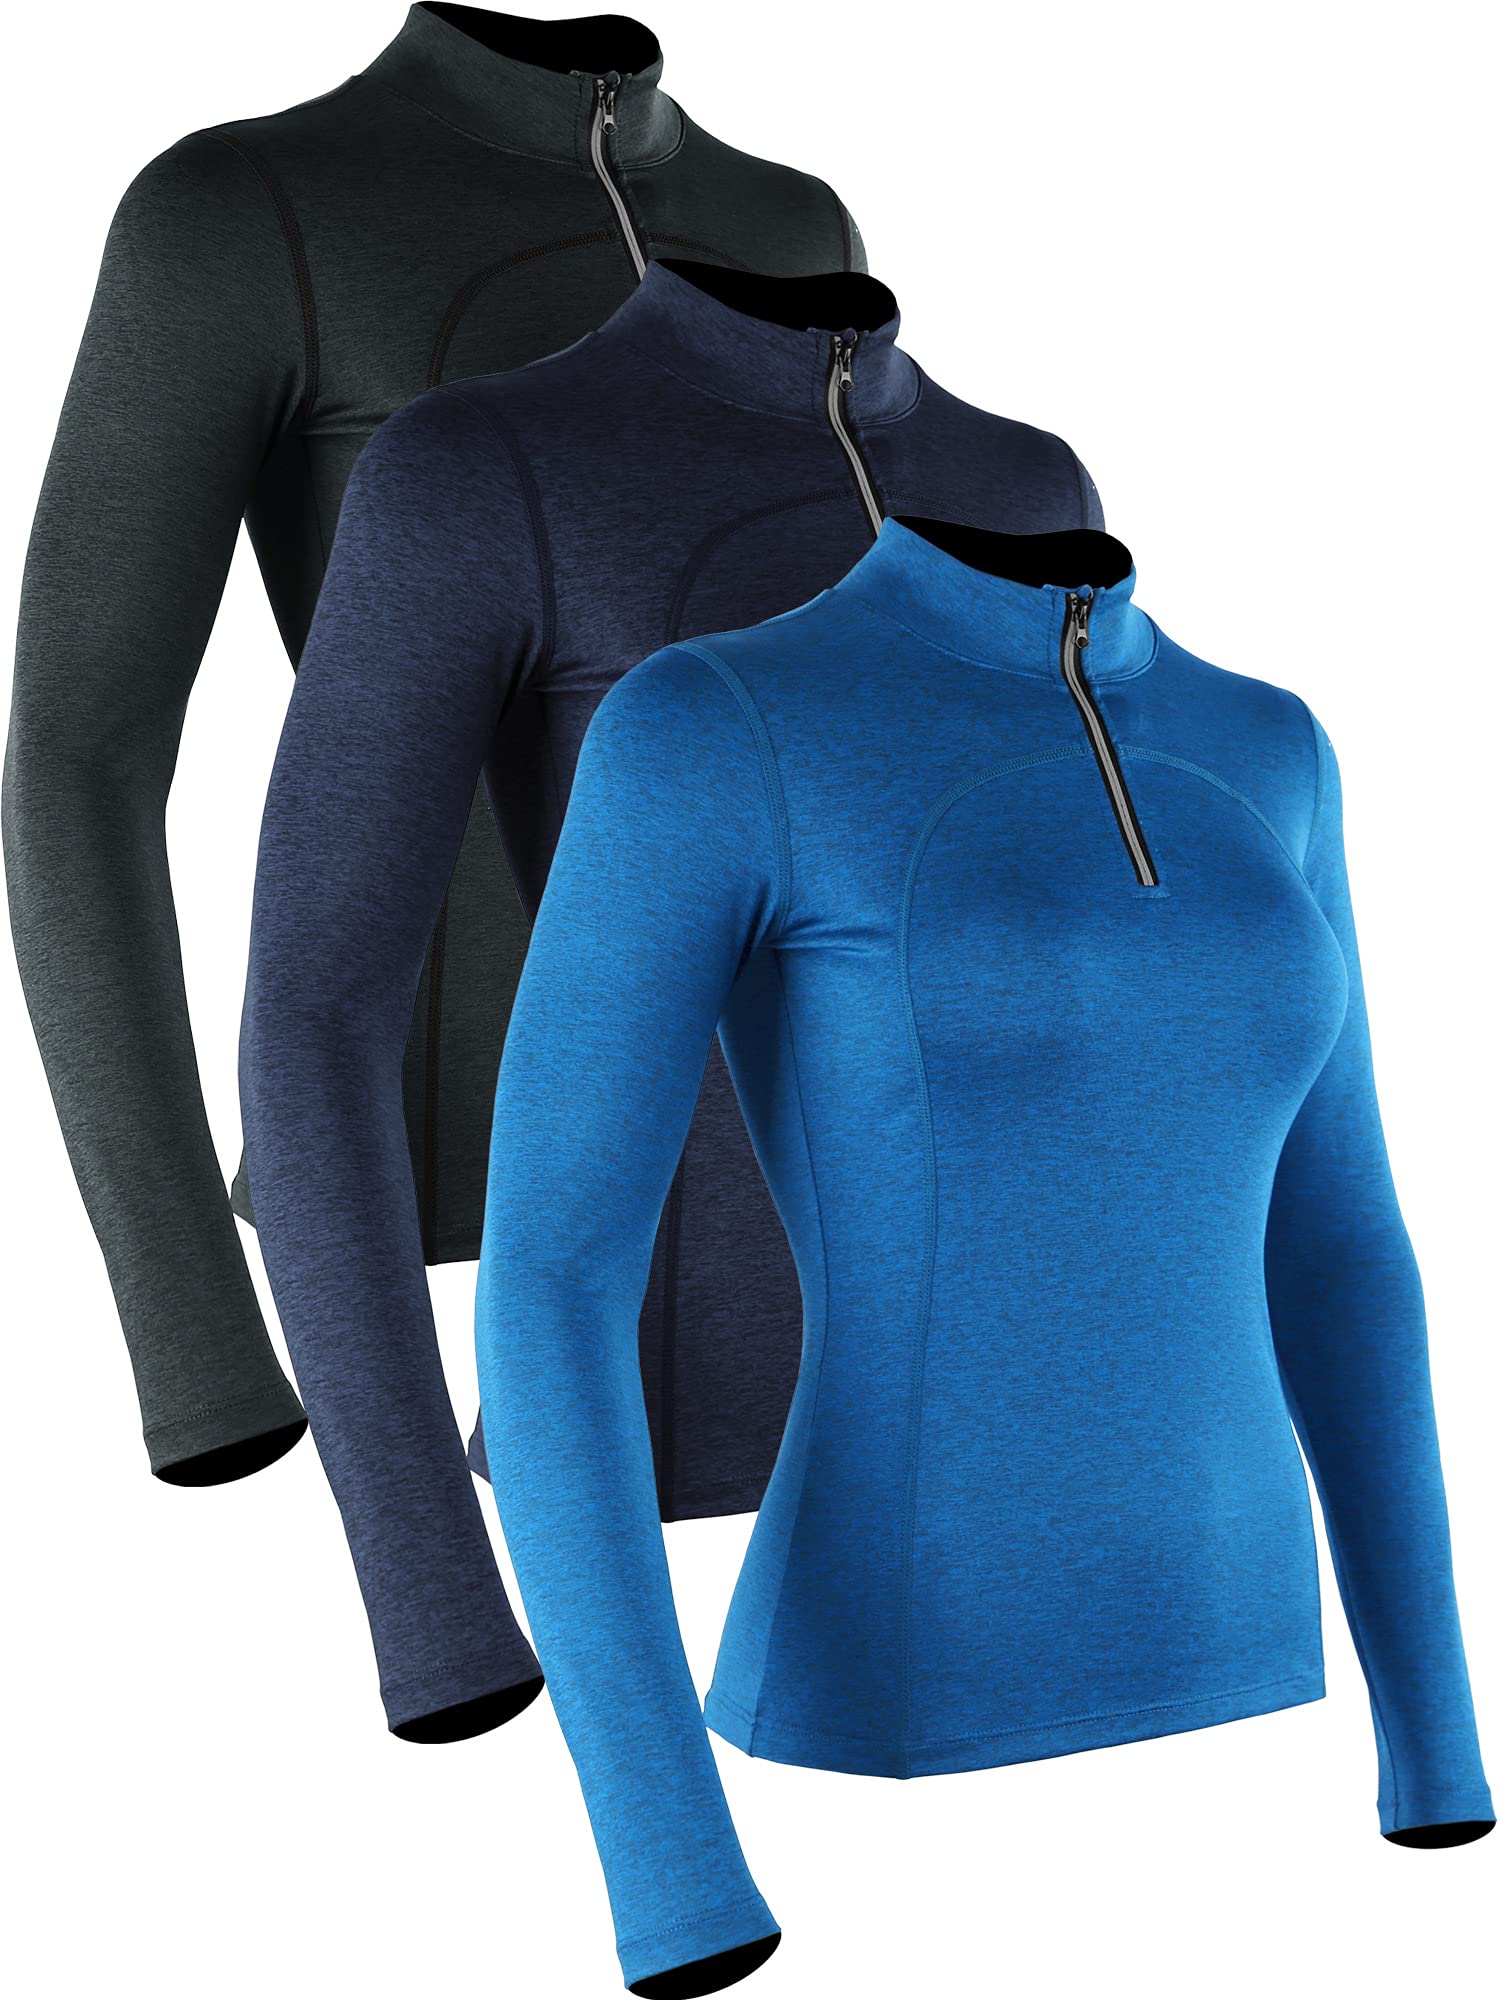 CADMUS Women's Compression Long Sleeve Shirts for Hiking Running Dry Fit  Tights X-Large #603: 3 Pack Black & Navy Blue & Blue